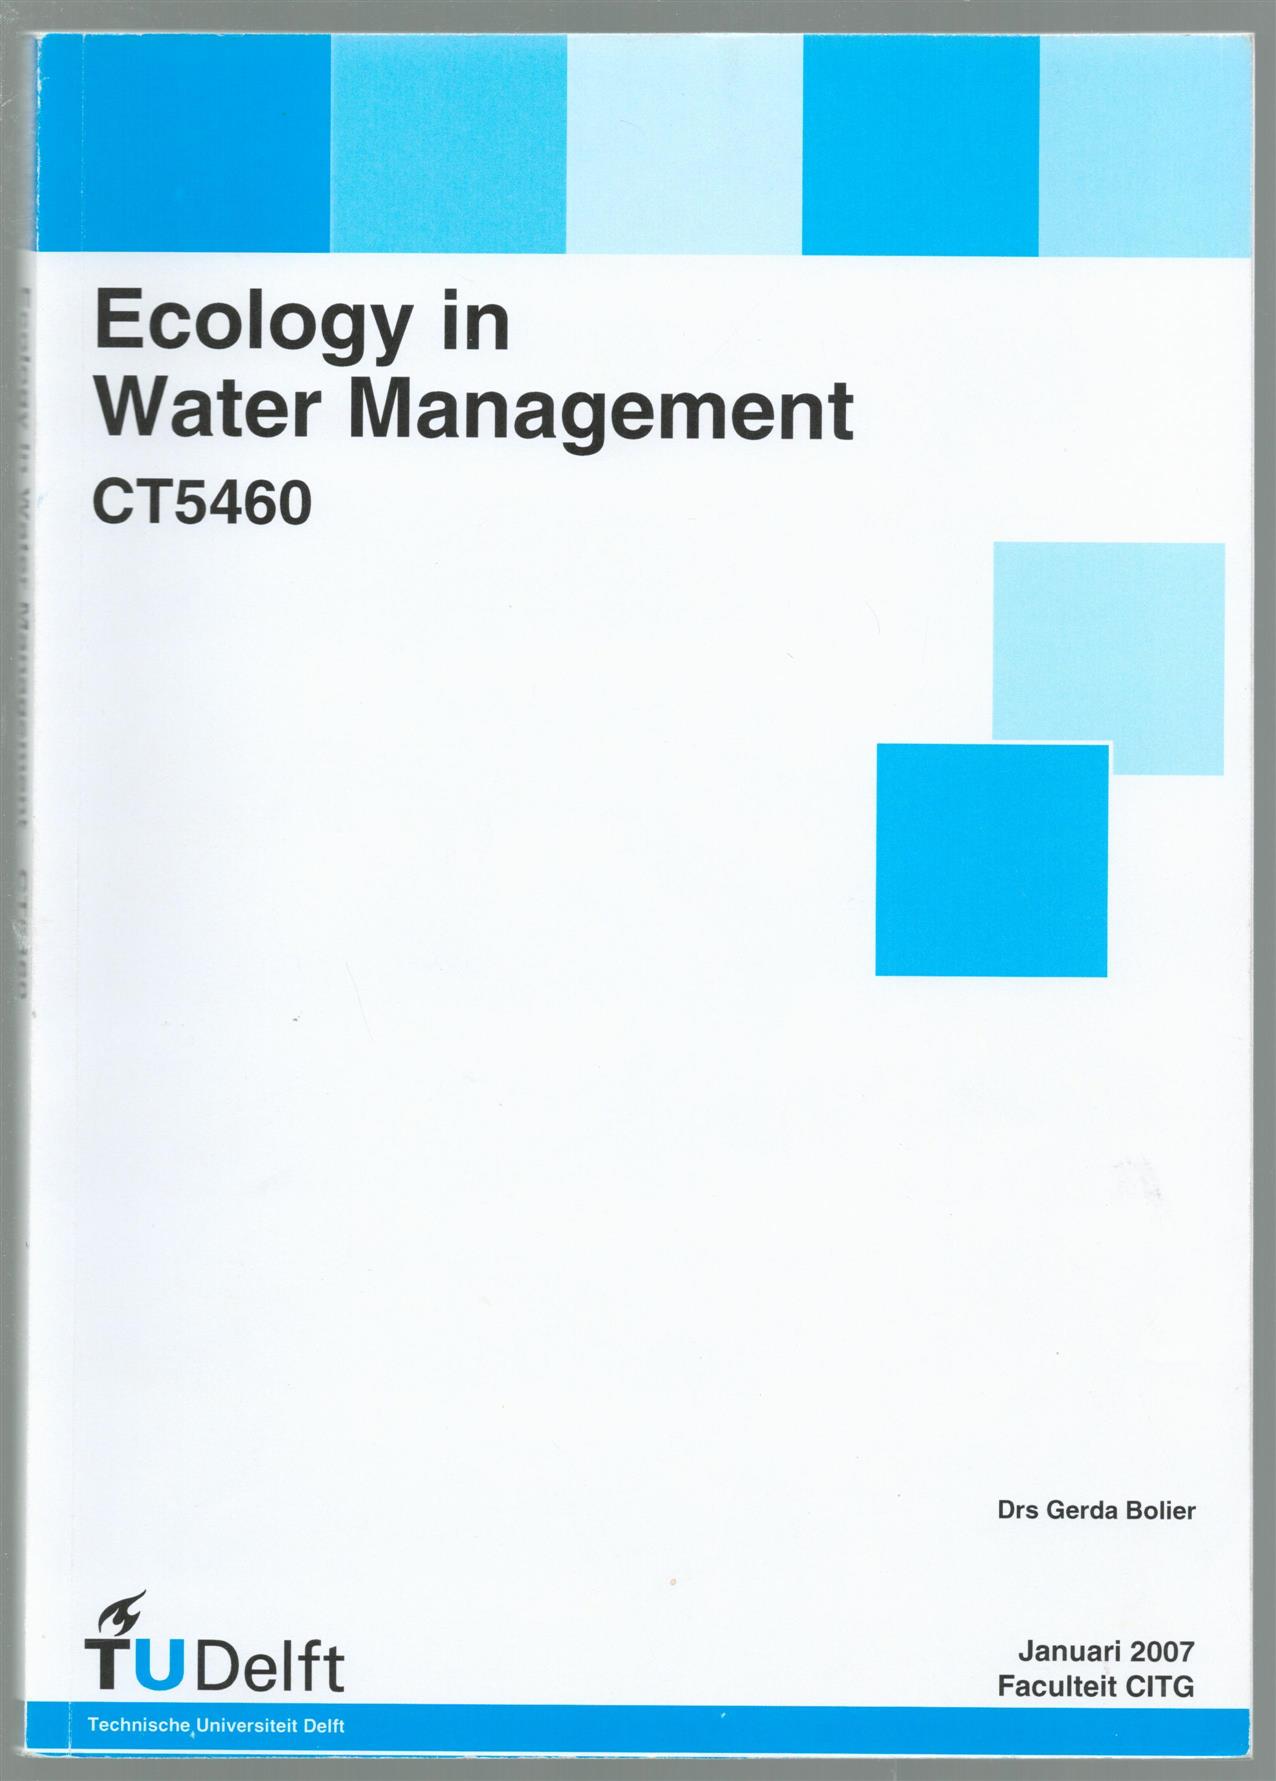 Gerda Bolier - Ecology in water management: CT5460.